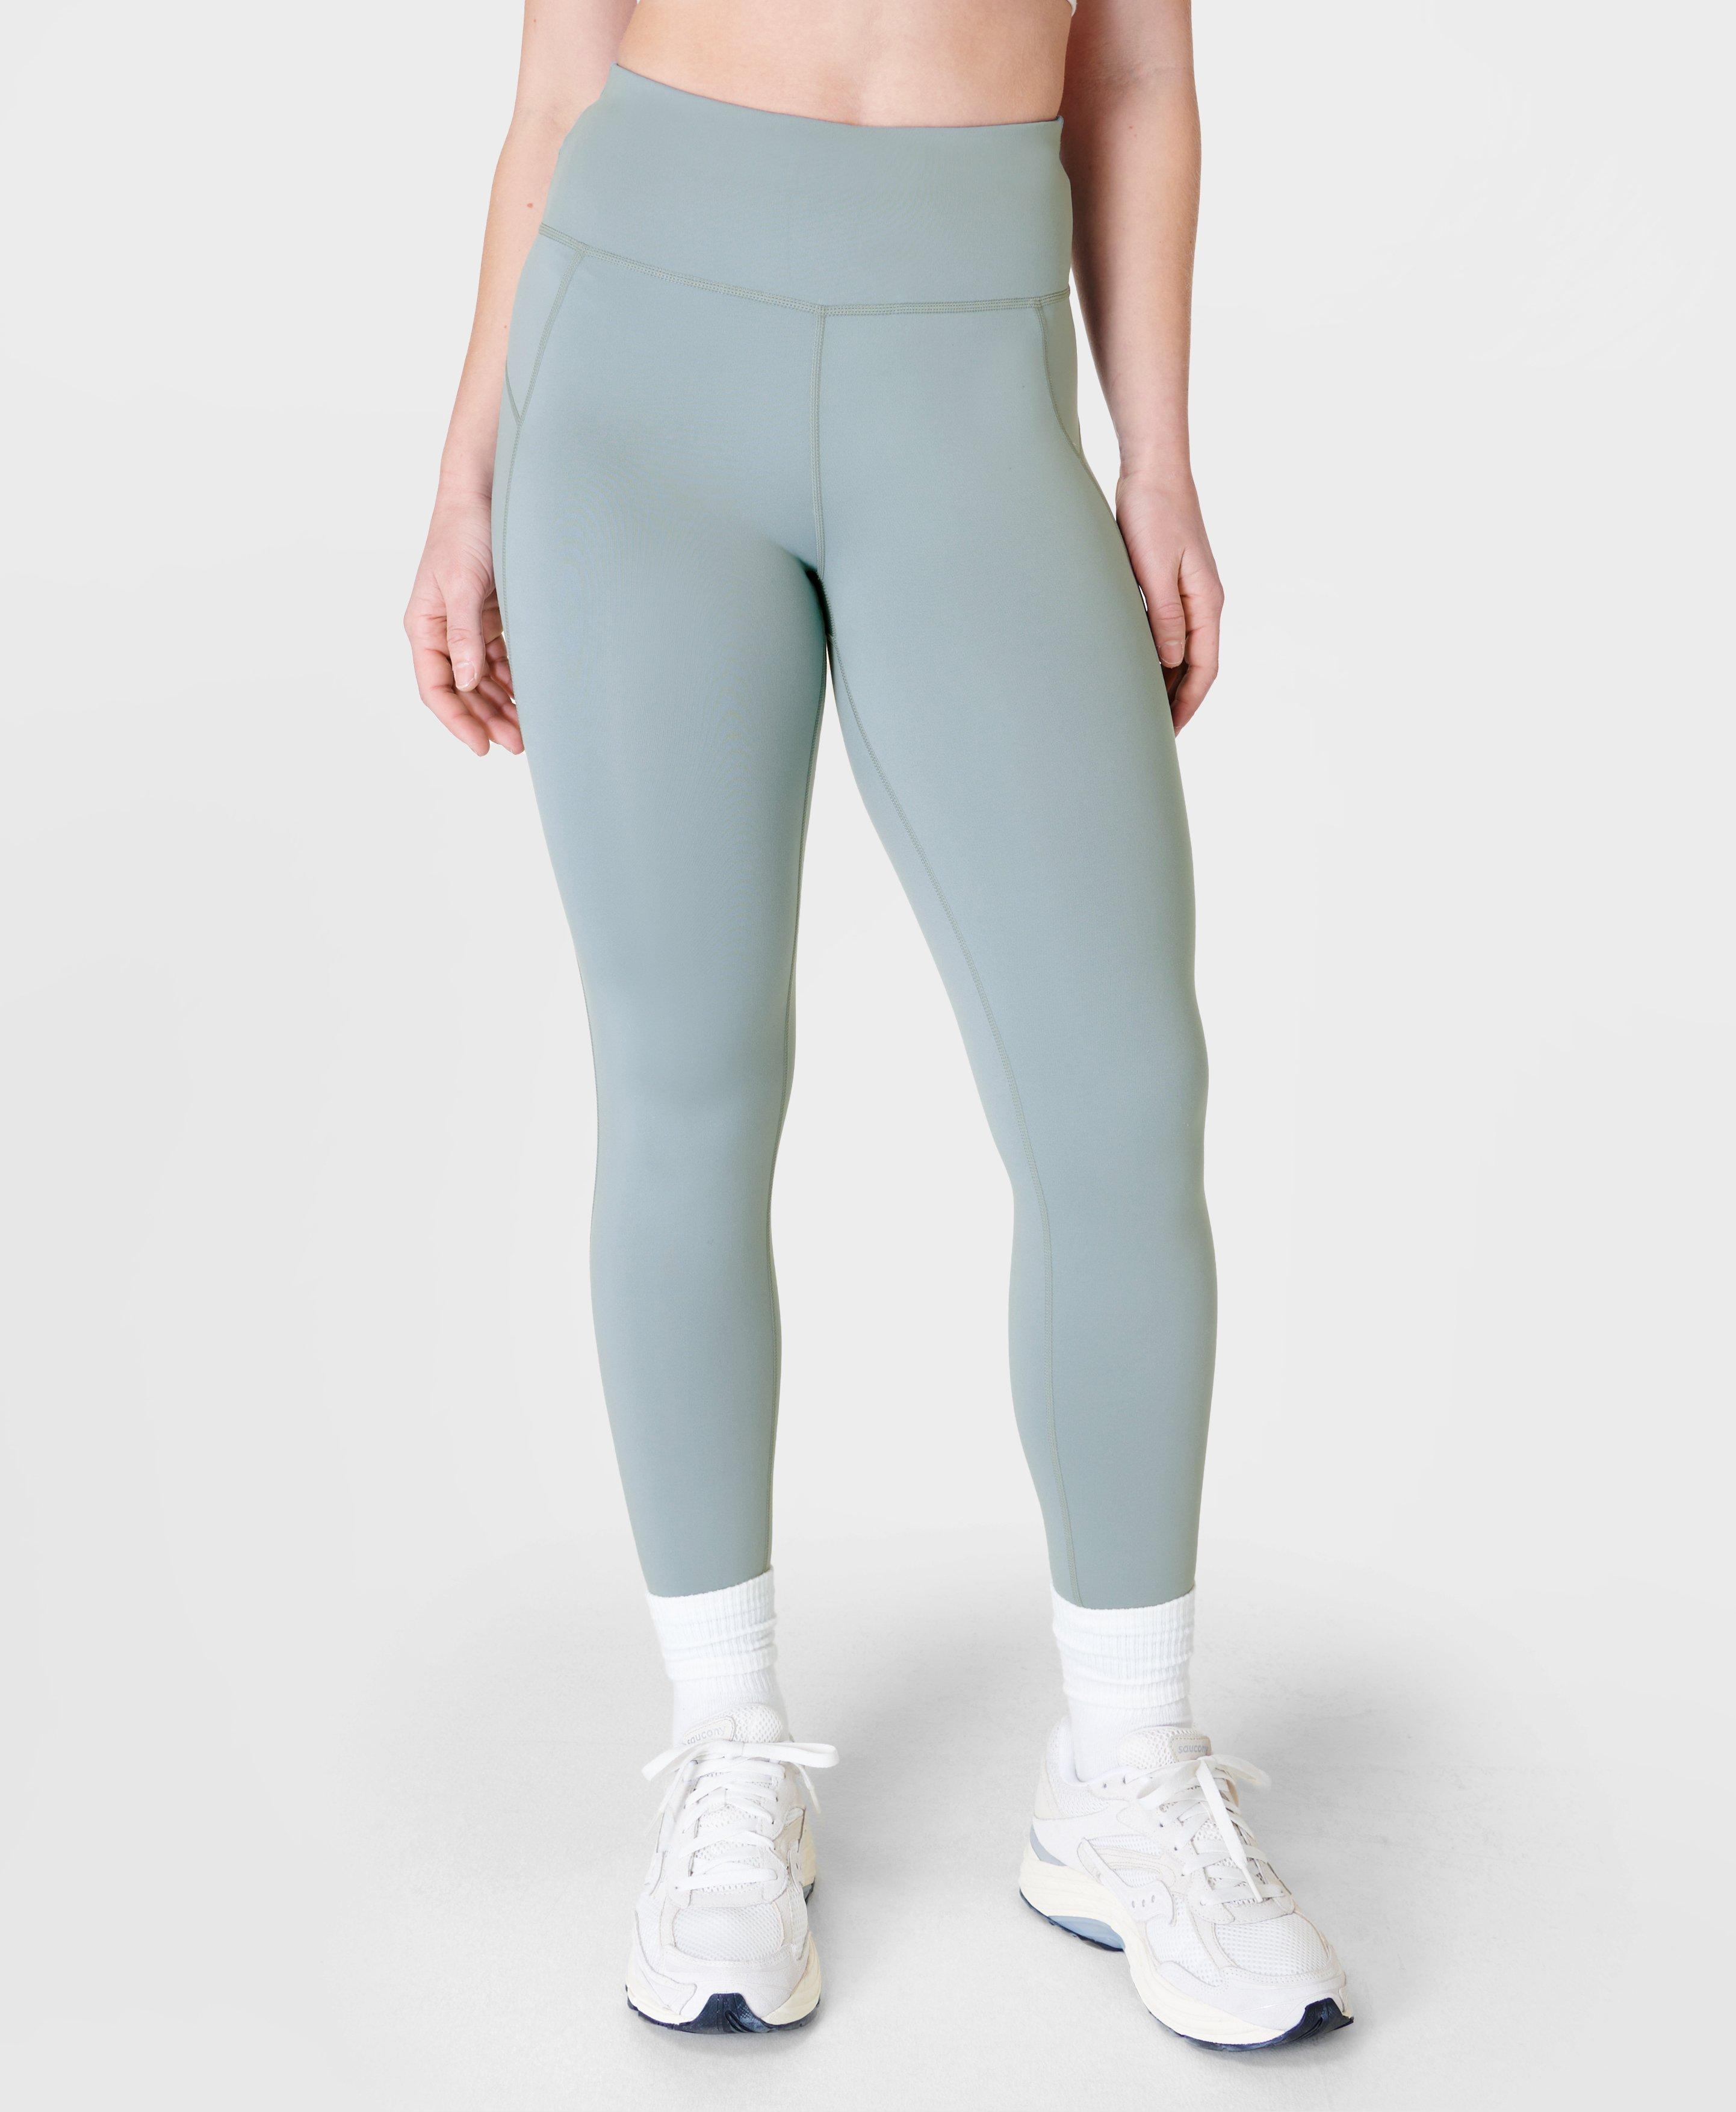 All Day Leggings, For WFH to Working Out